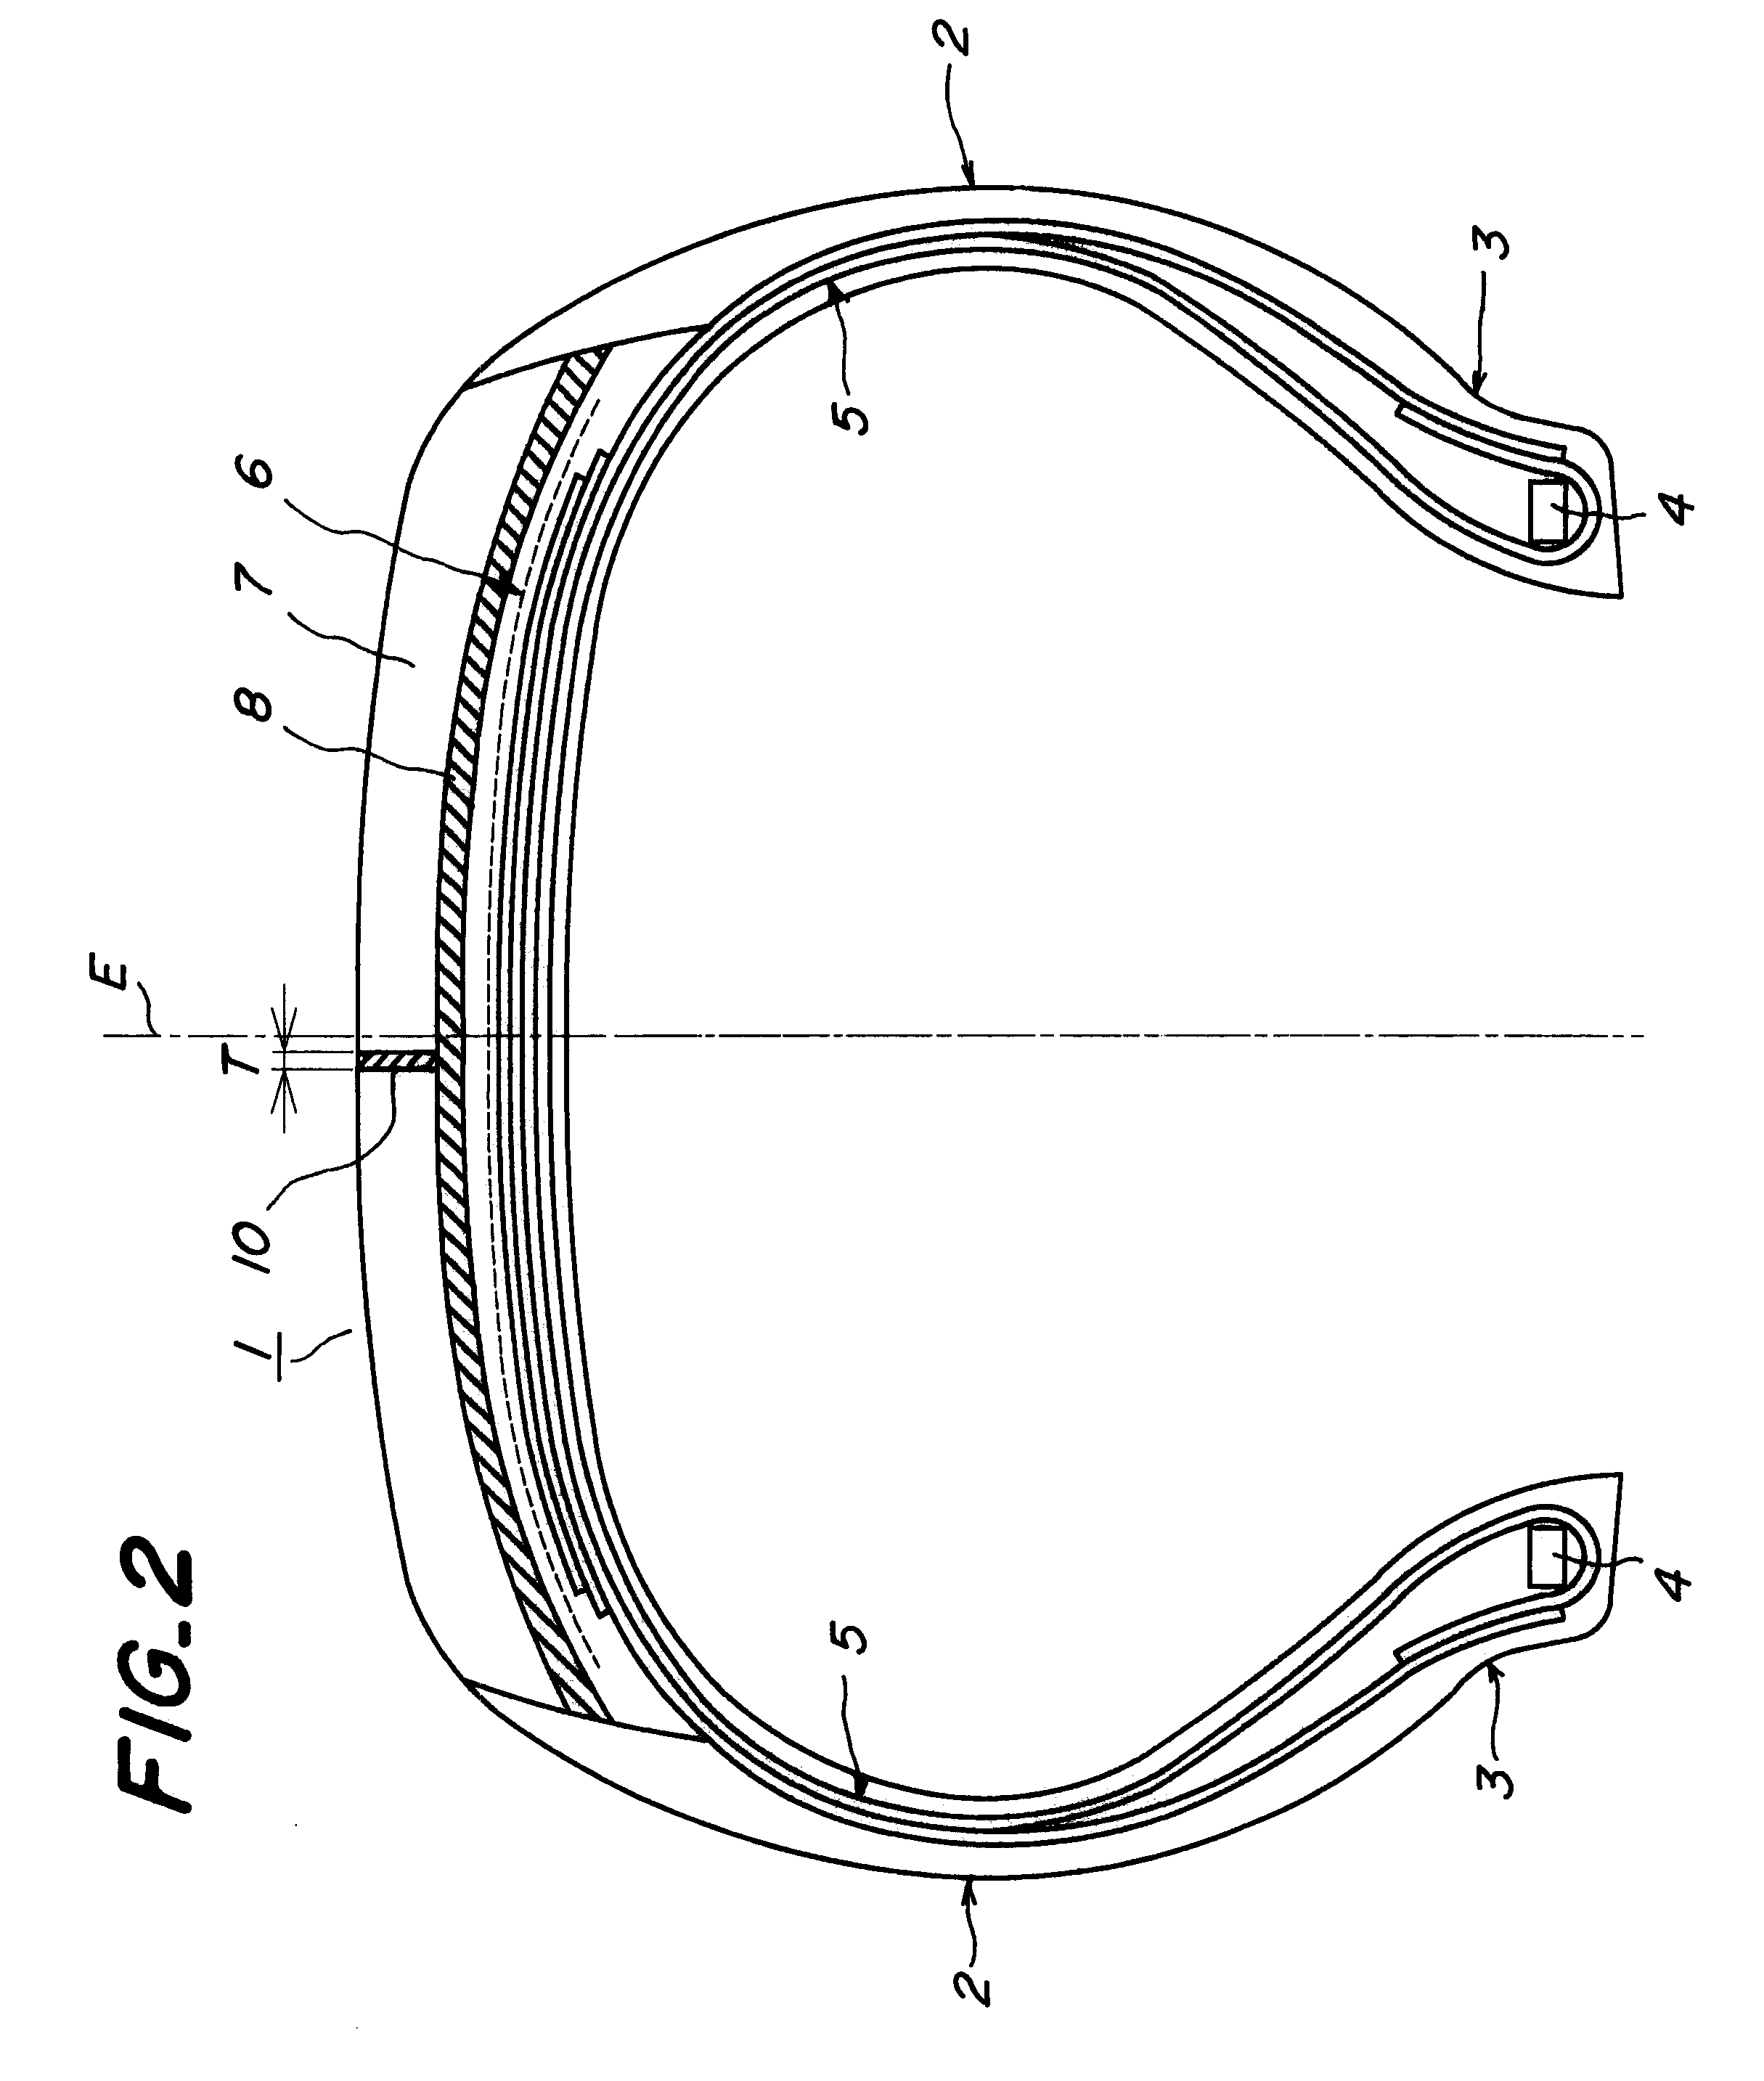 Pneumatic tire having electrically conductive rubber layer in land portion defined between circumferential grooves